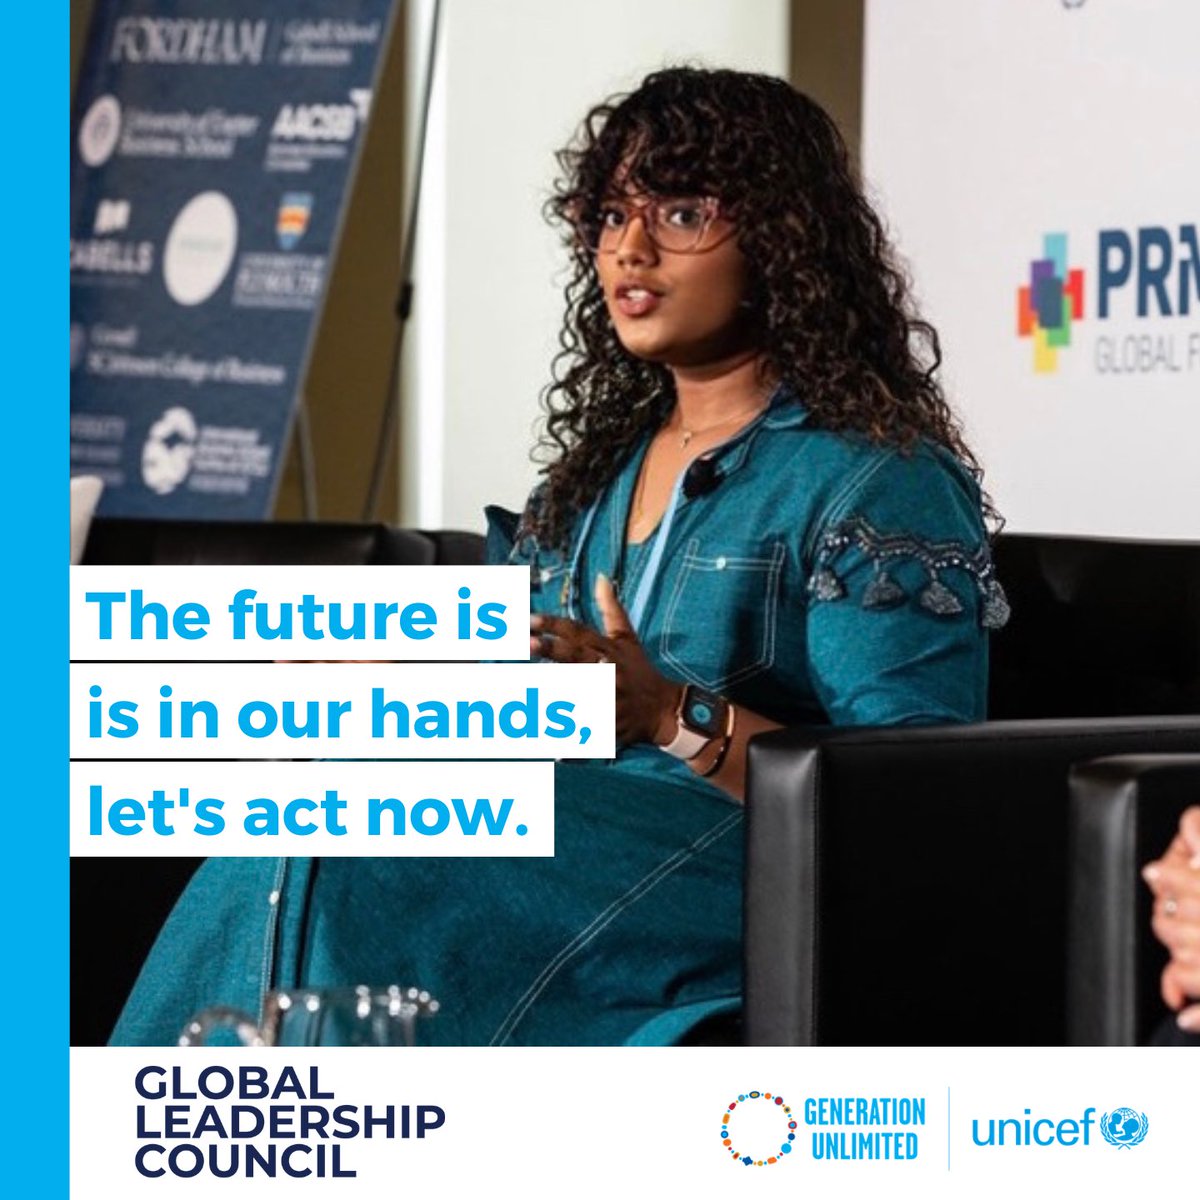 ✨Thrilled to share that I have been invited to the Global Leadership Council alongside (GLC) Co-chairs, Bob Moritz, Global Chairperson, PwC and Catherine Russell,ED,UNICEF. Excited that I will also be joining a roundtable discussion. It’s time for #skillsrightnow 💡